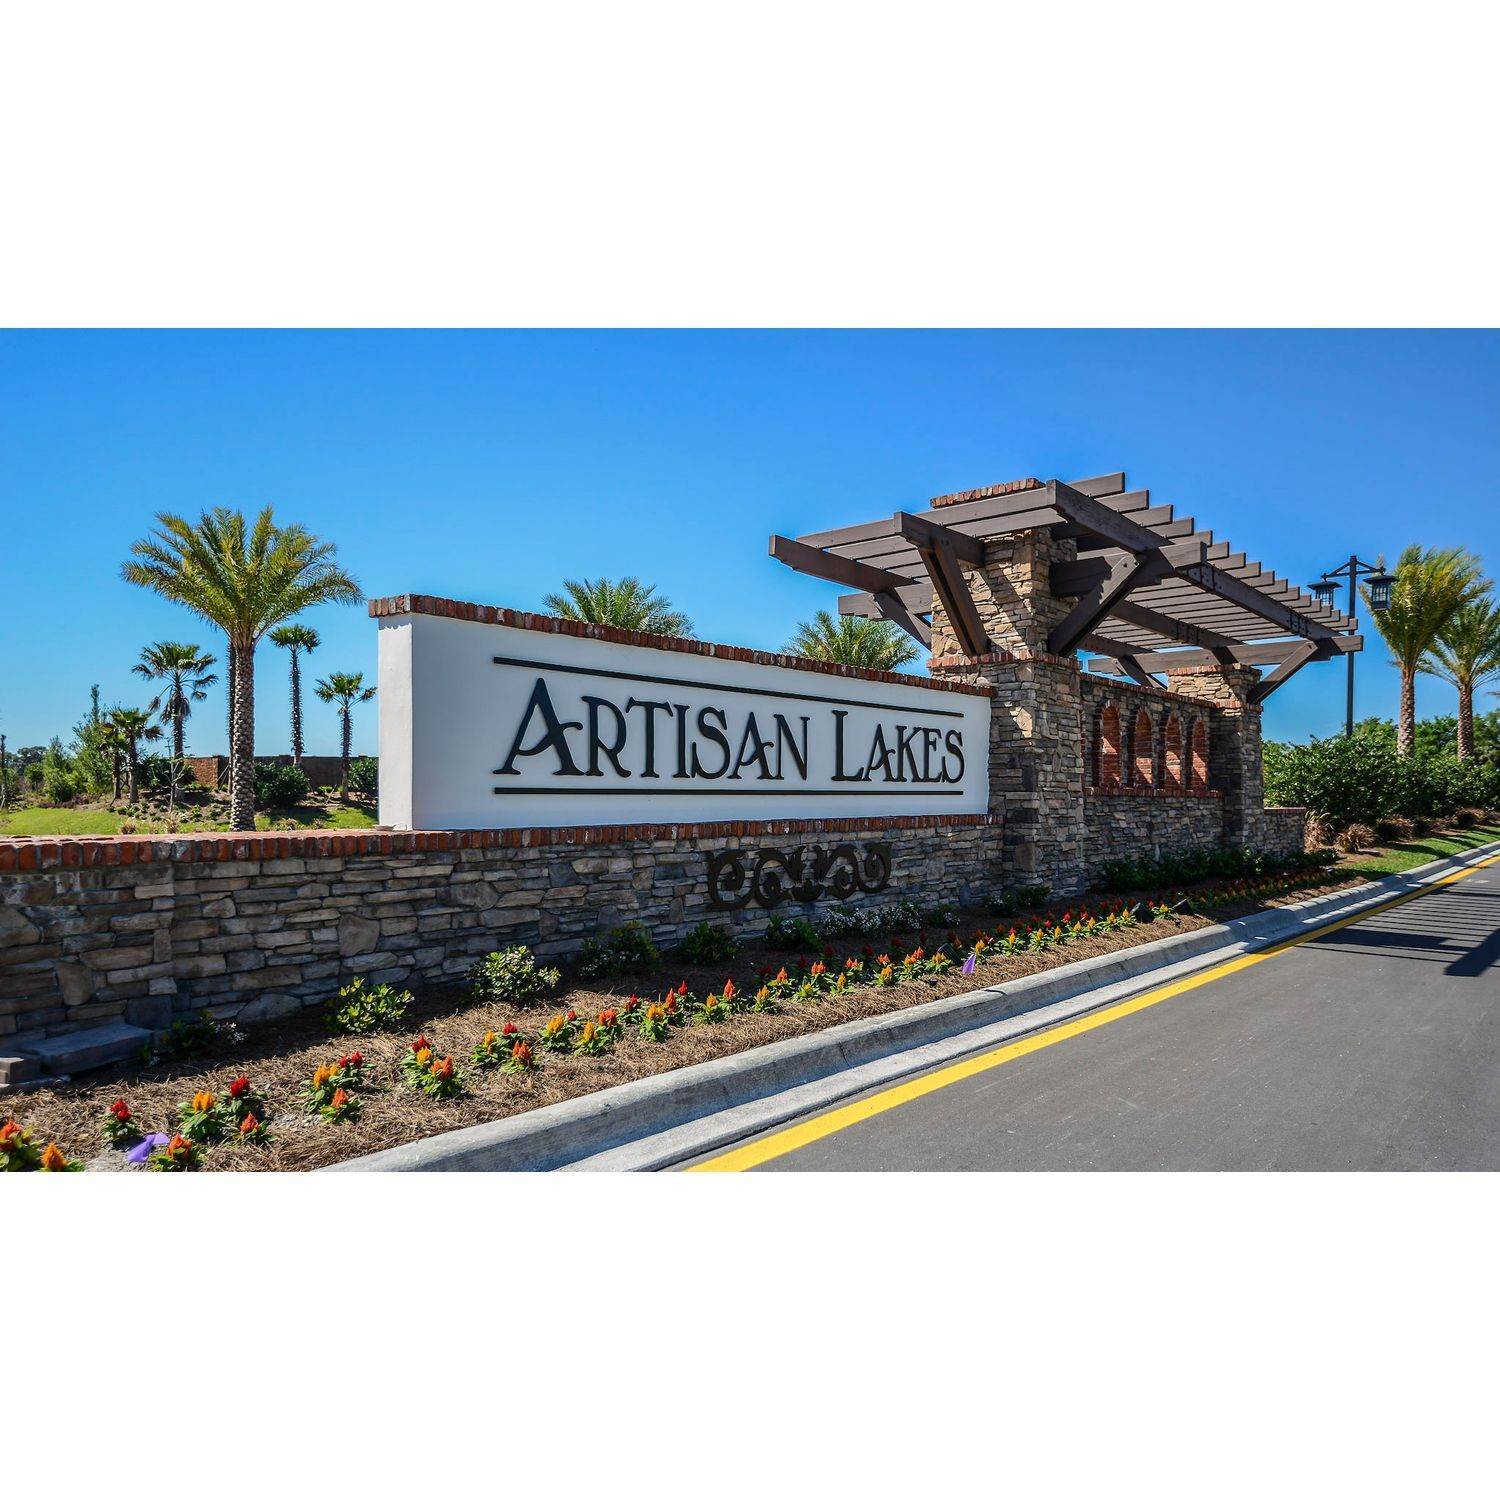 12. Eave's Bend at Artisan Lakes building at 5967 Maidenstone Way, Palmetto, FL 34221